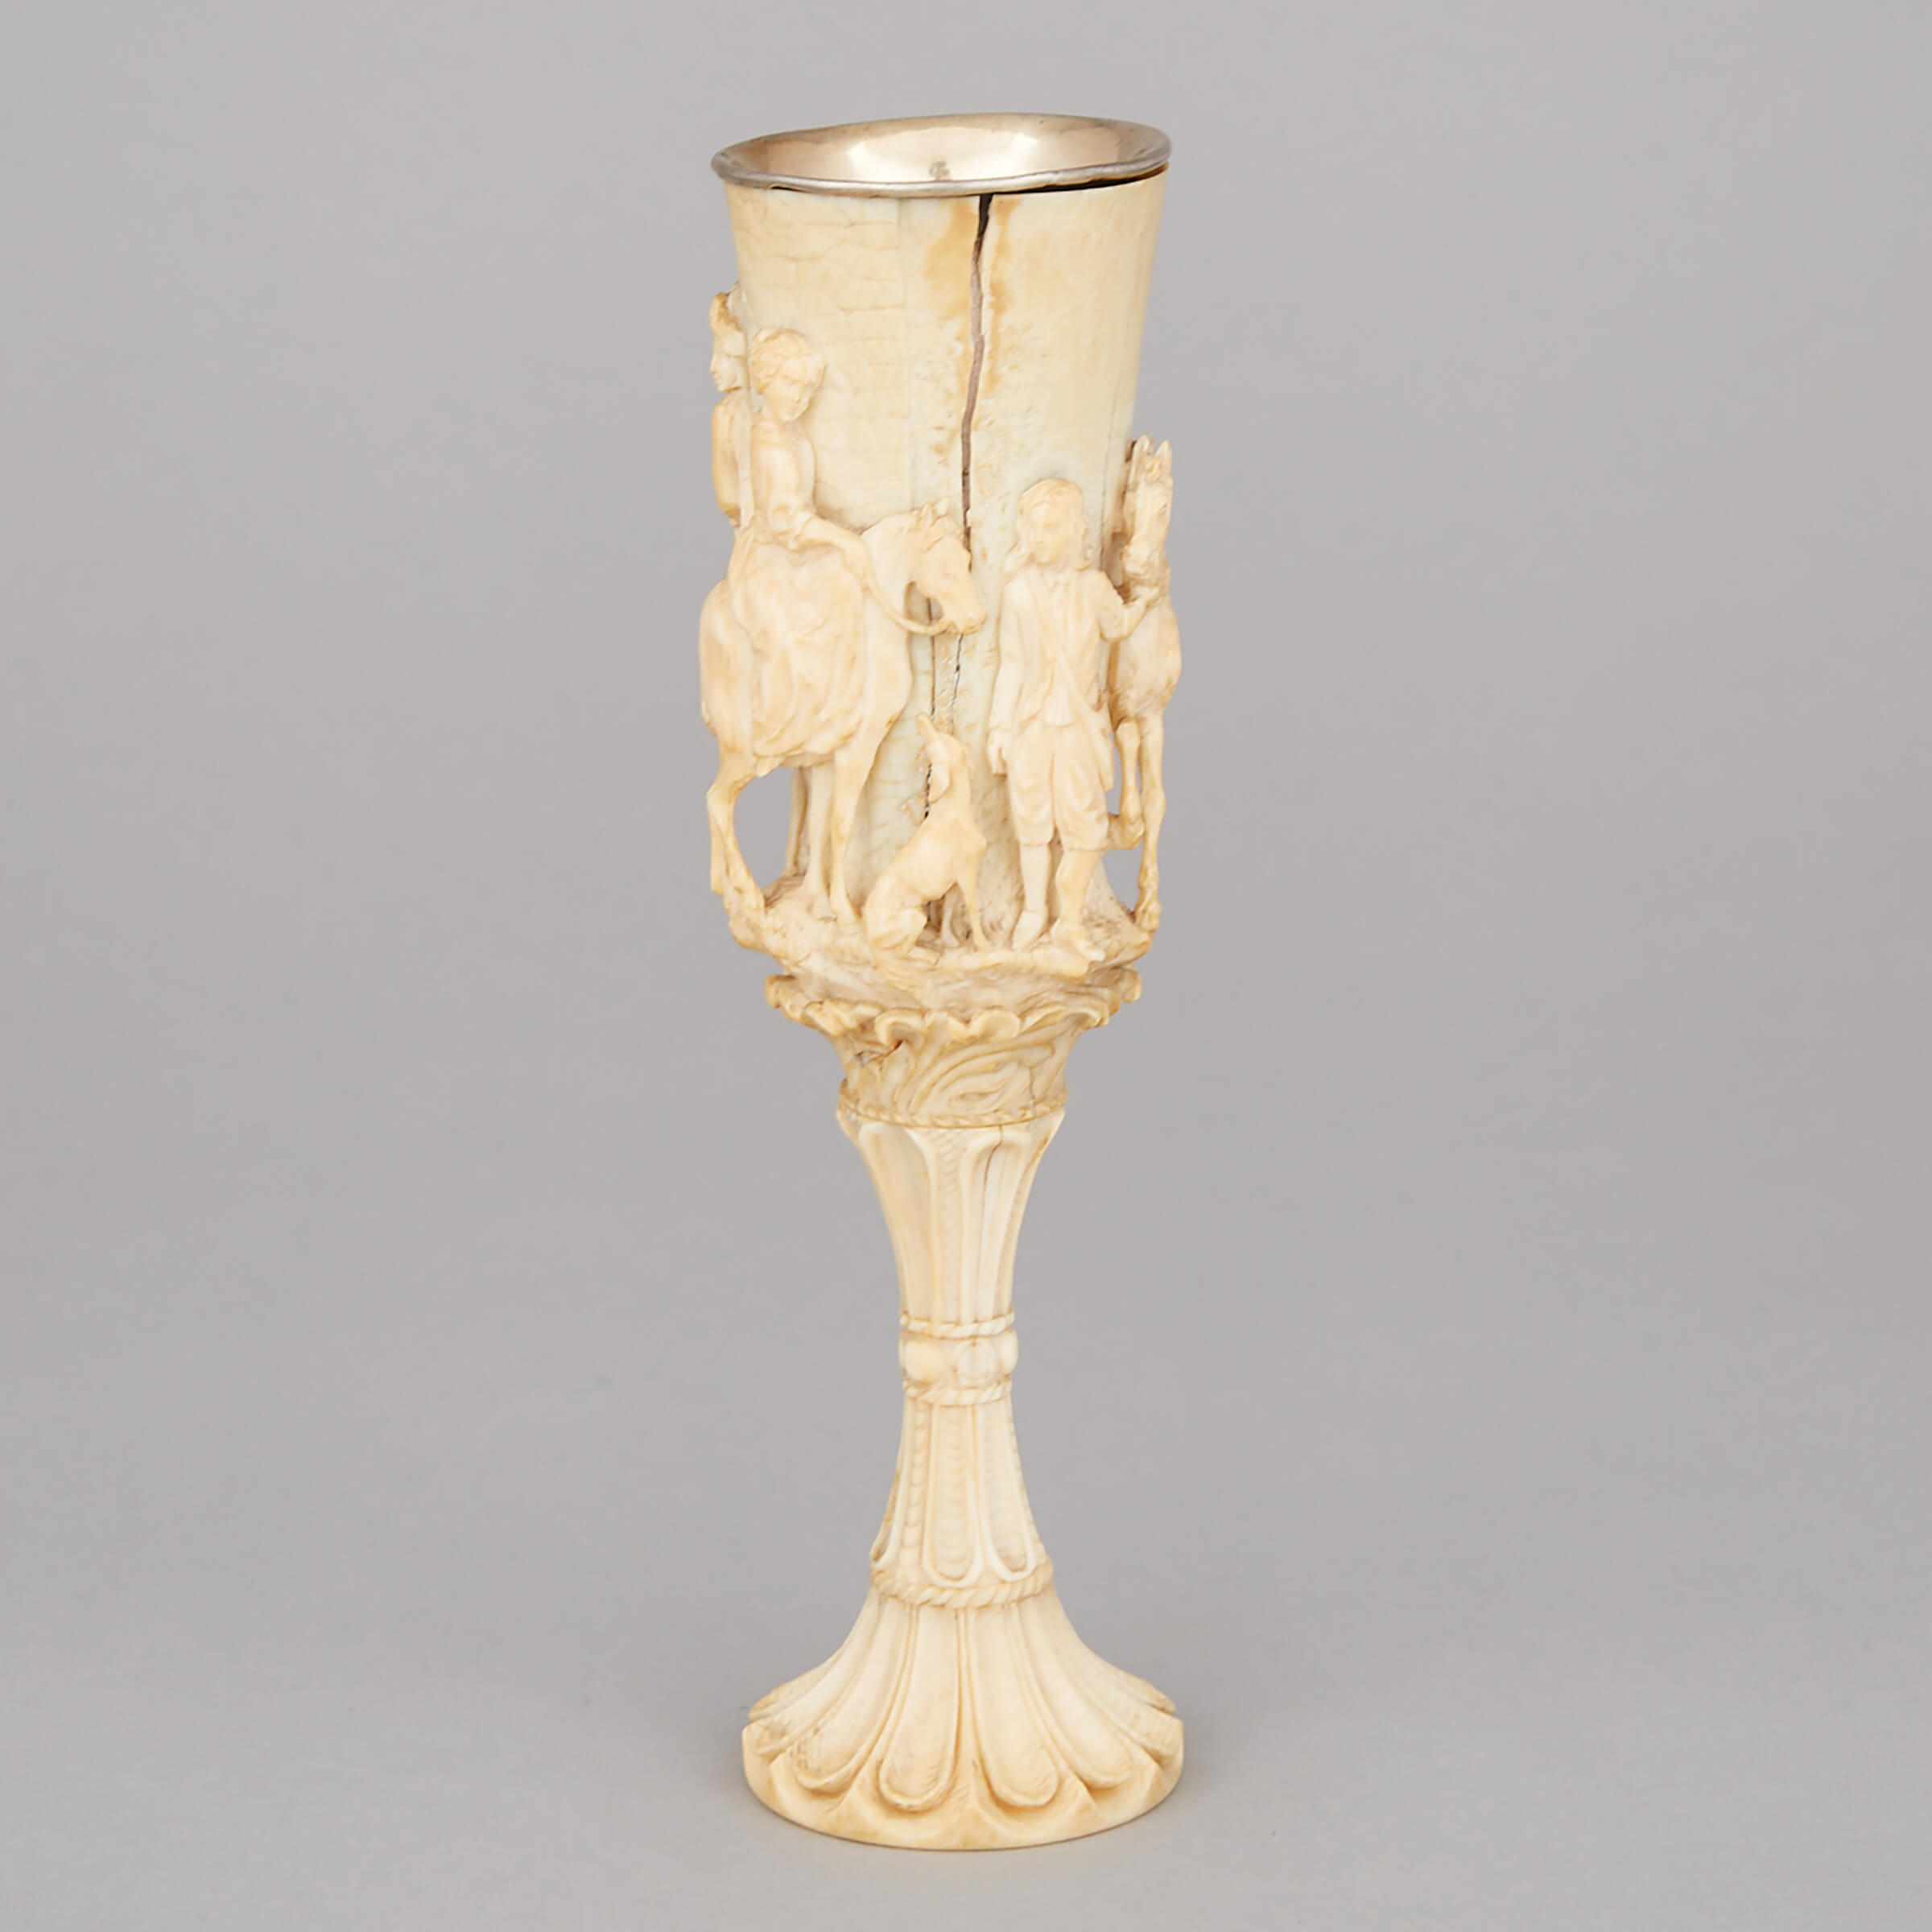 German Gothic Carved Ivory Wine Cup, mid 19th century